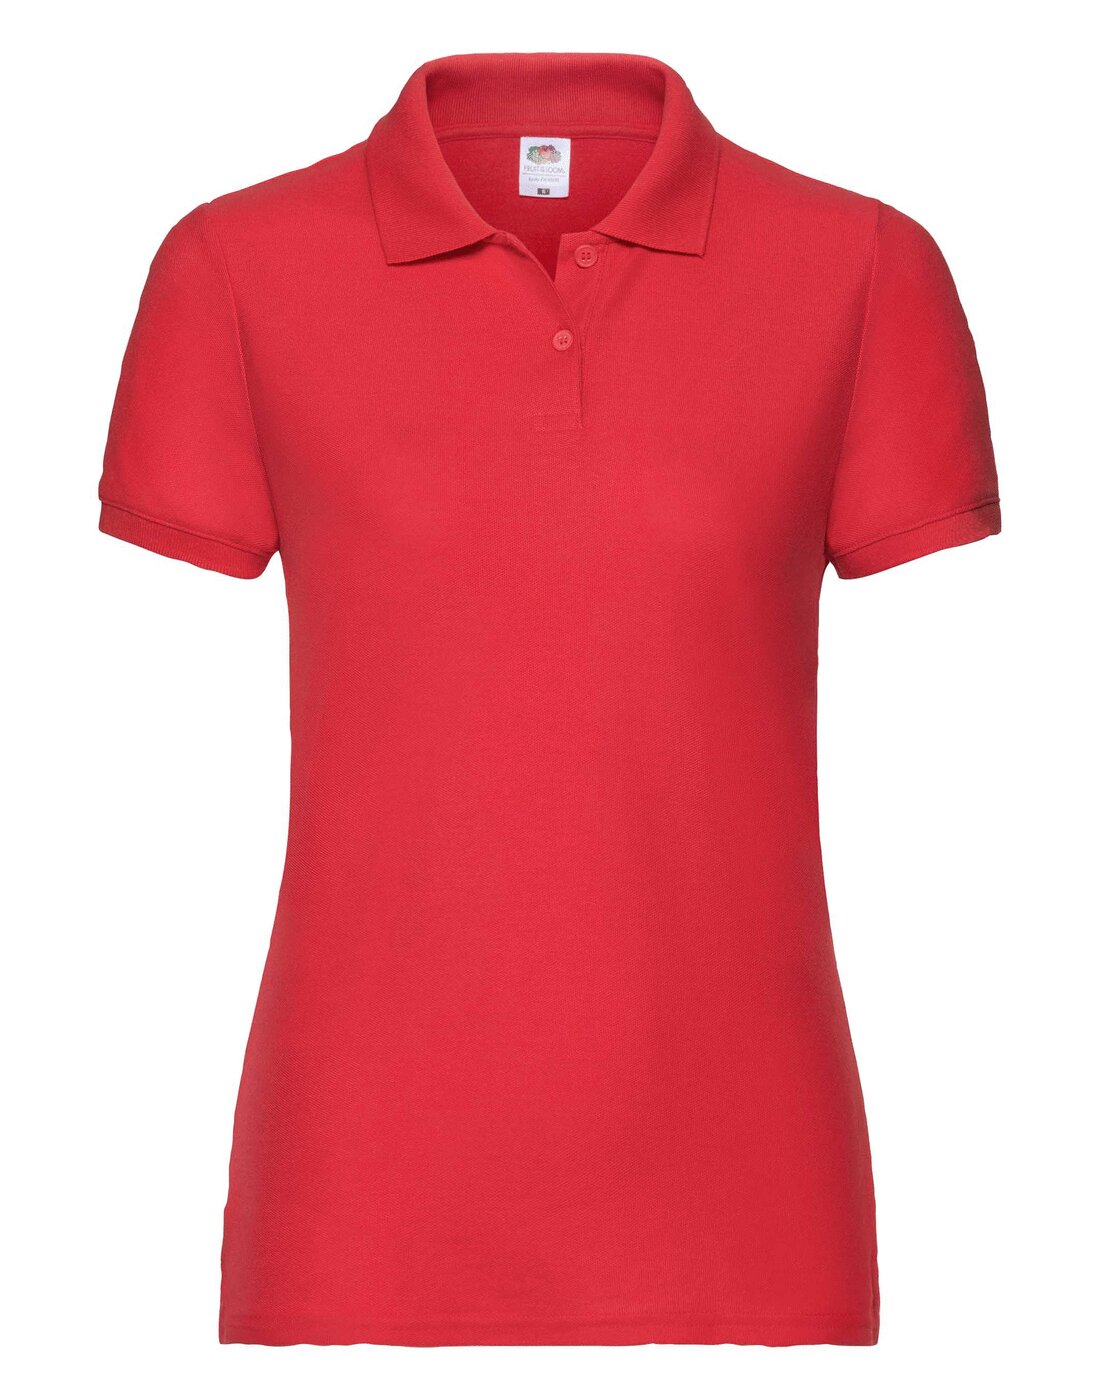 Fruit of the Loom Ladies 65/35 Polo - Red